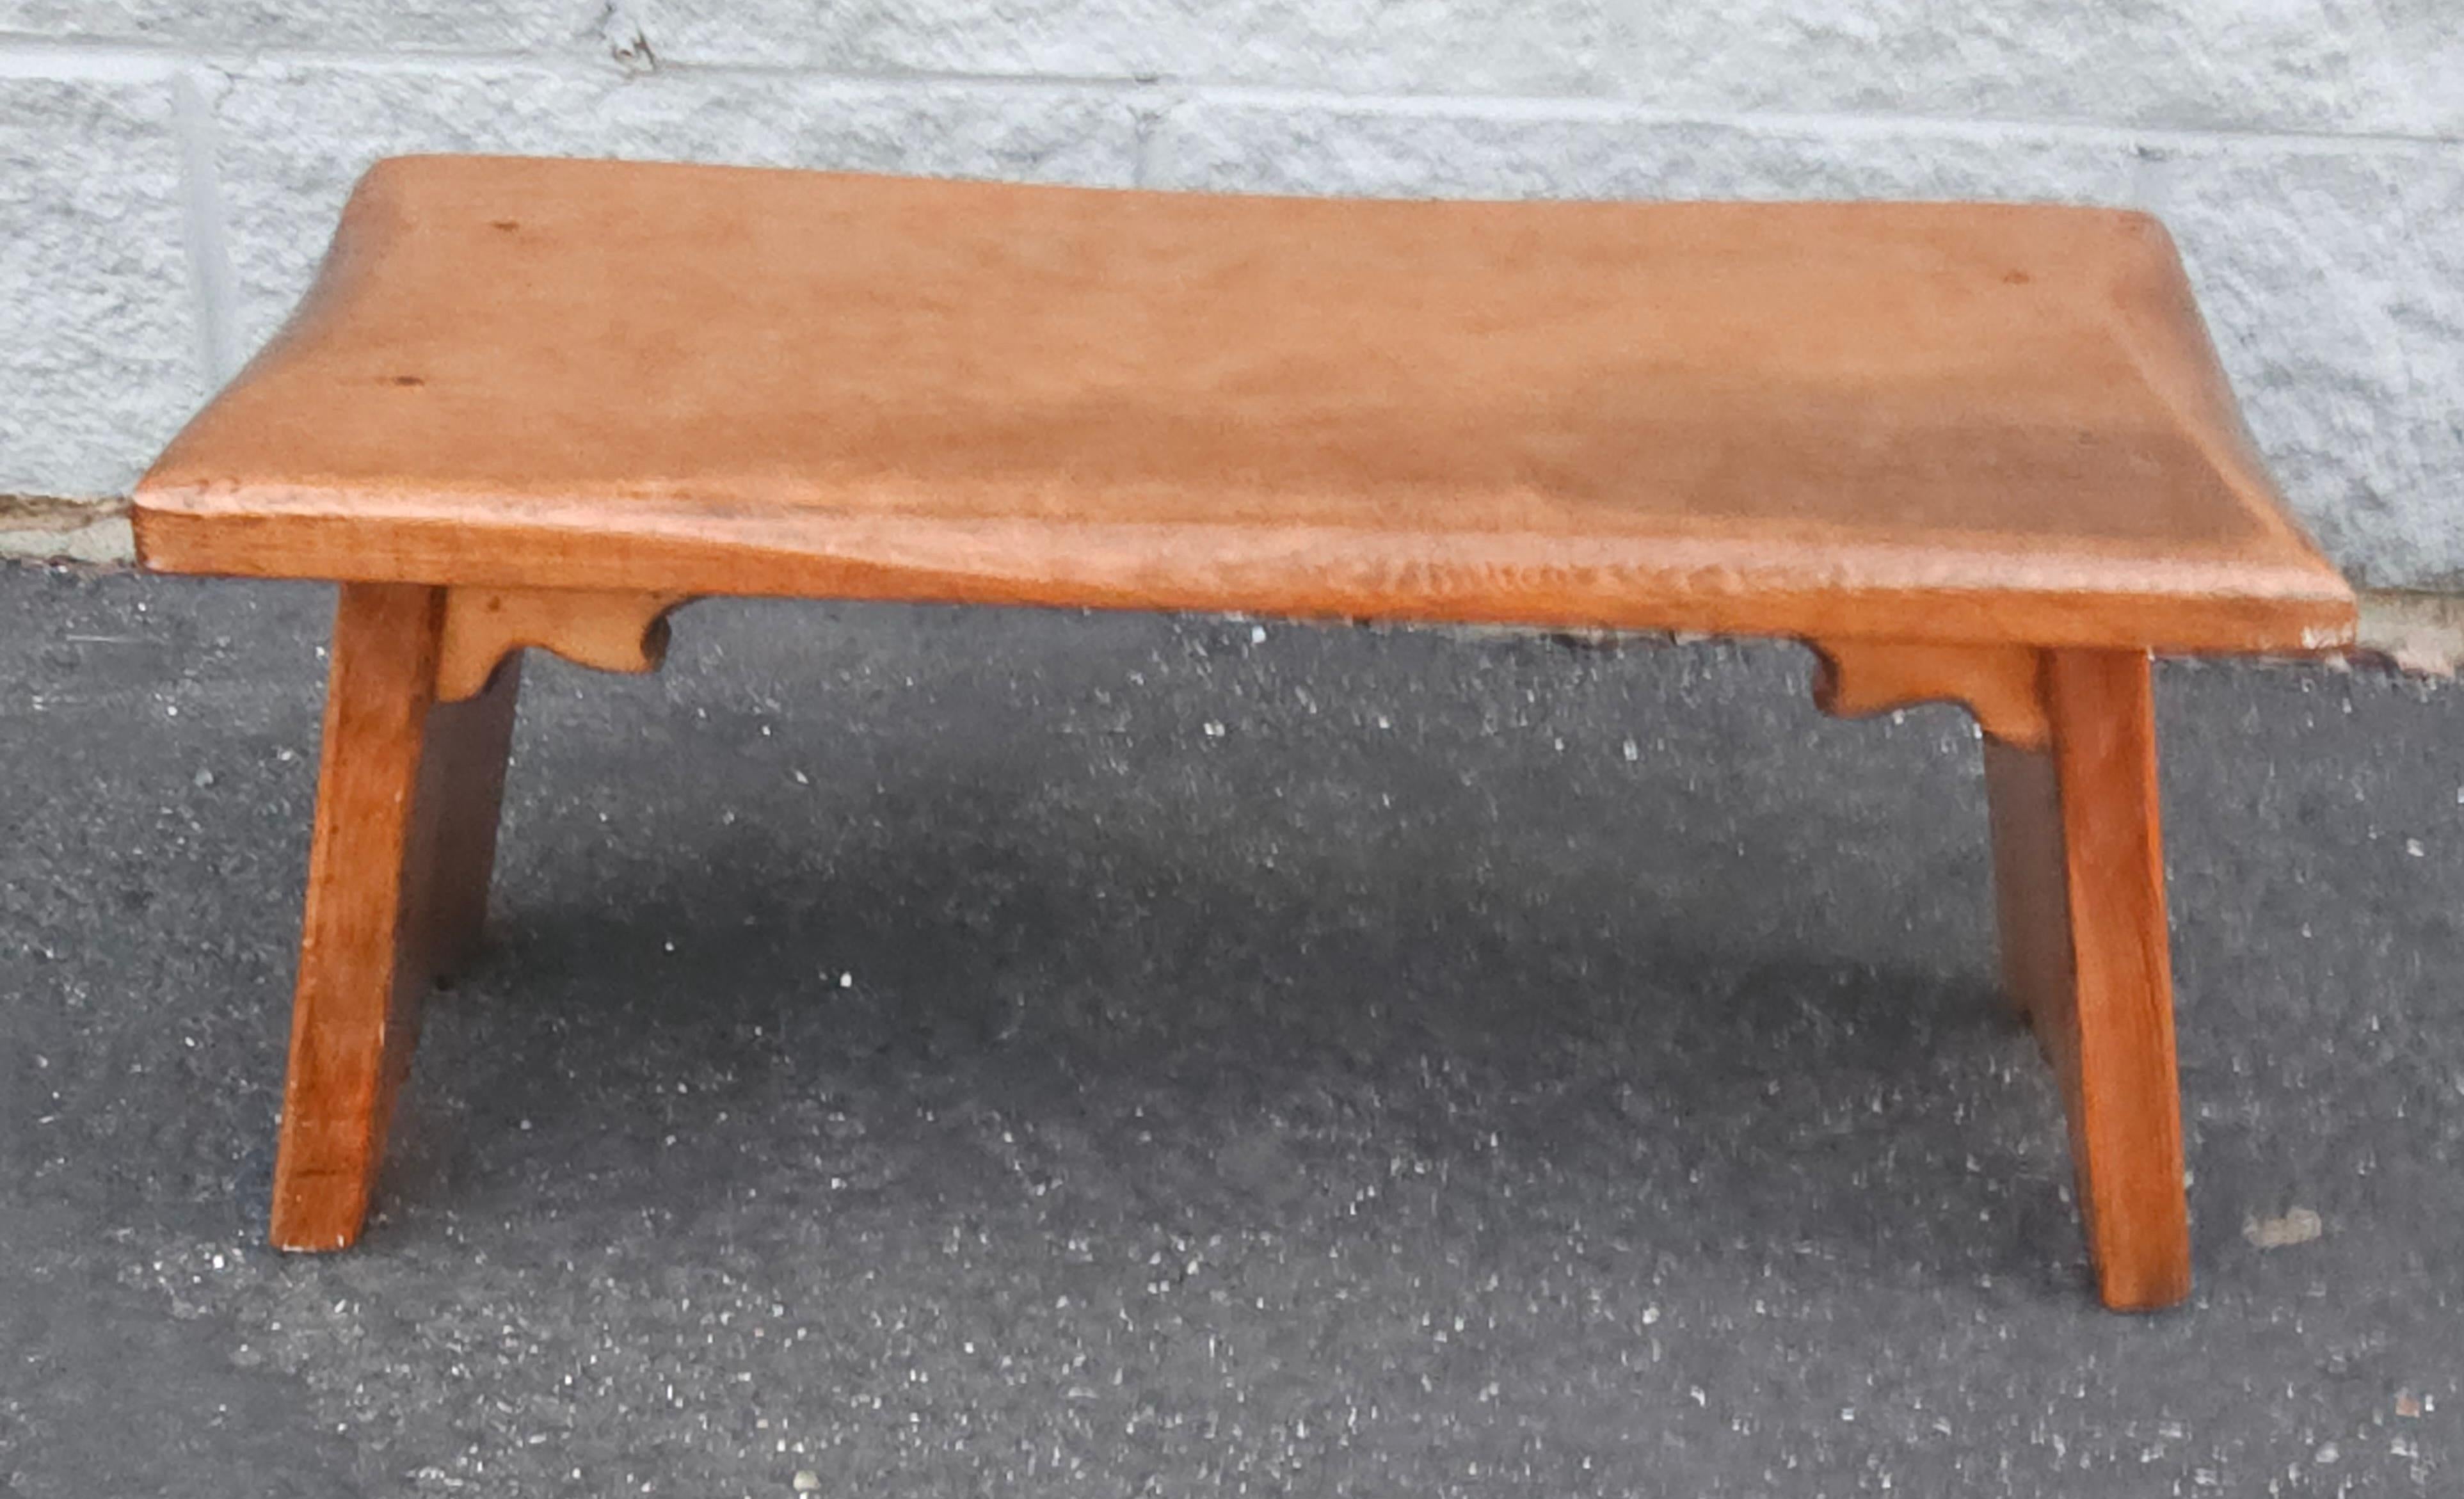 An Early American Style Low Bench or Footstool. Finished Throughout. Measures 24